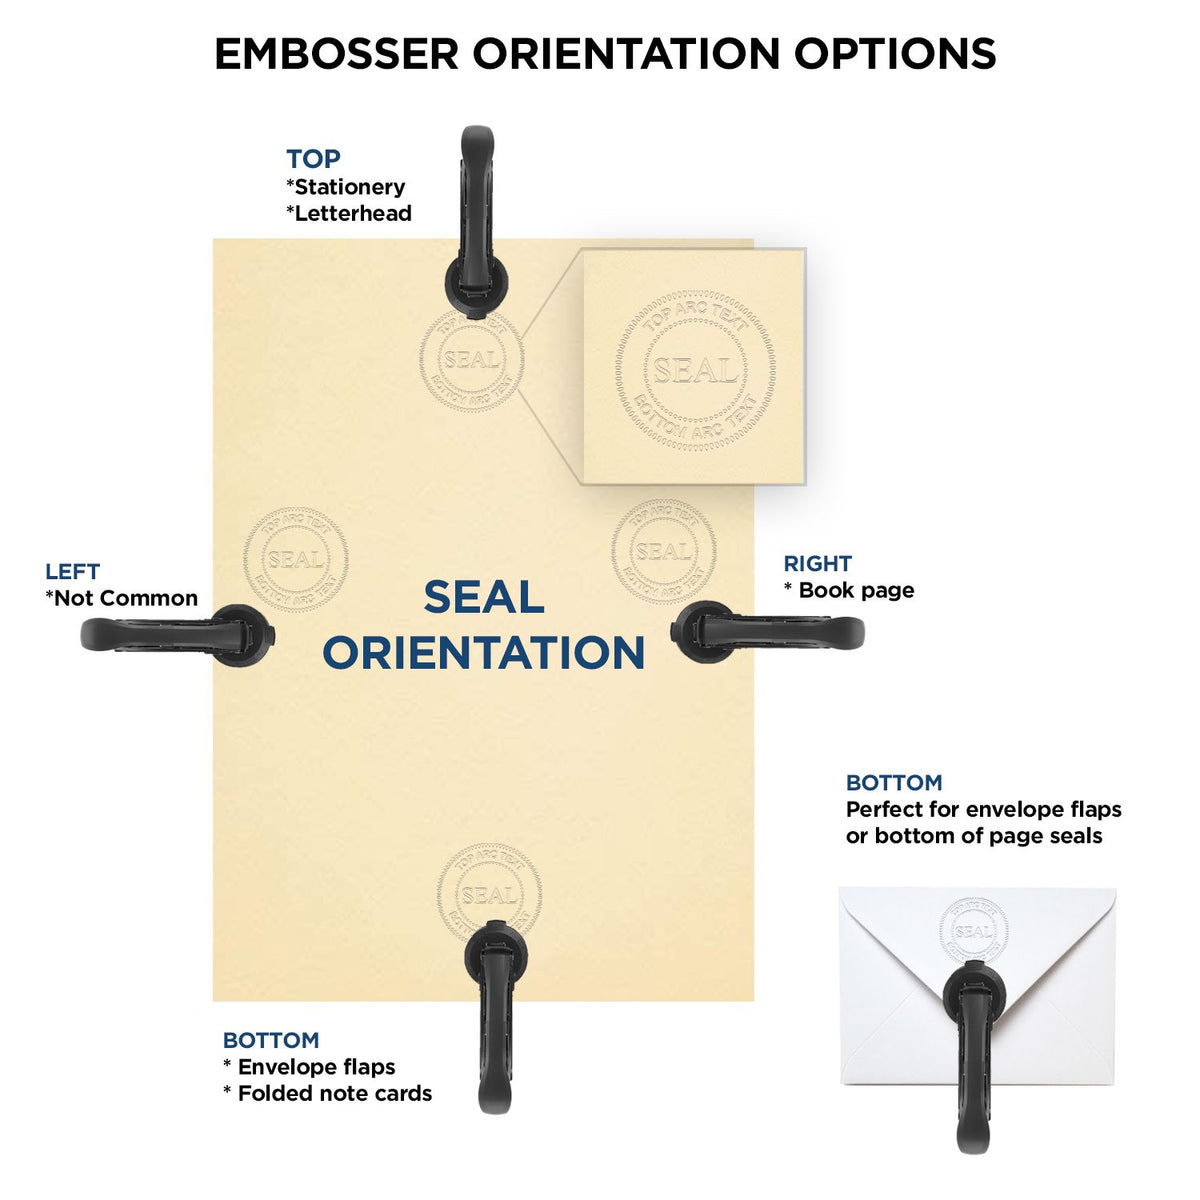 An infographic for the State of Florida Long Reach Architectural Embossing Seal showing embosser orientation, this is showing examples of a top, bottom, right and left insert.